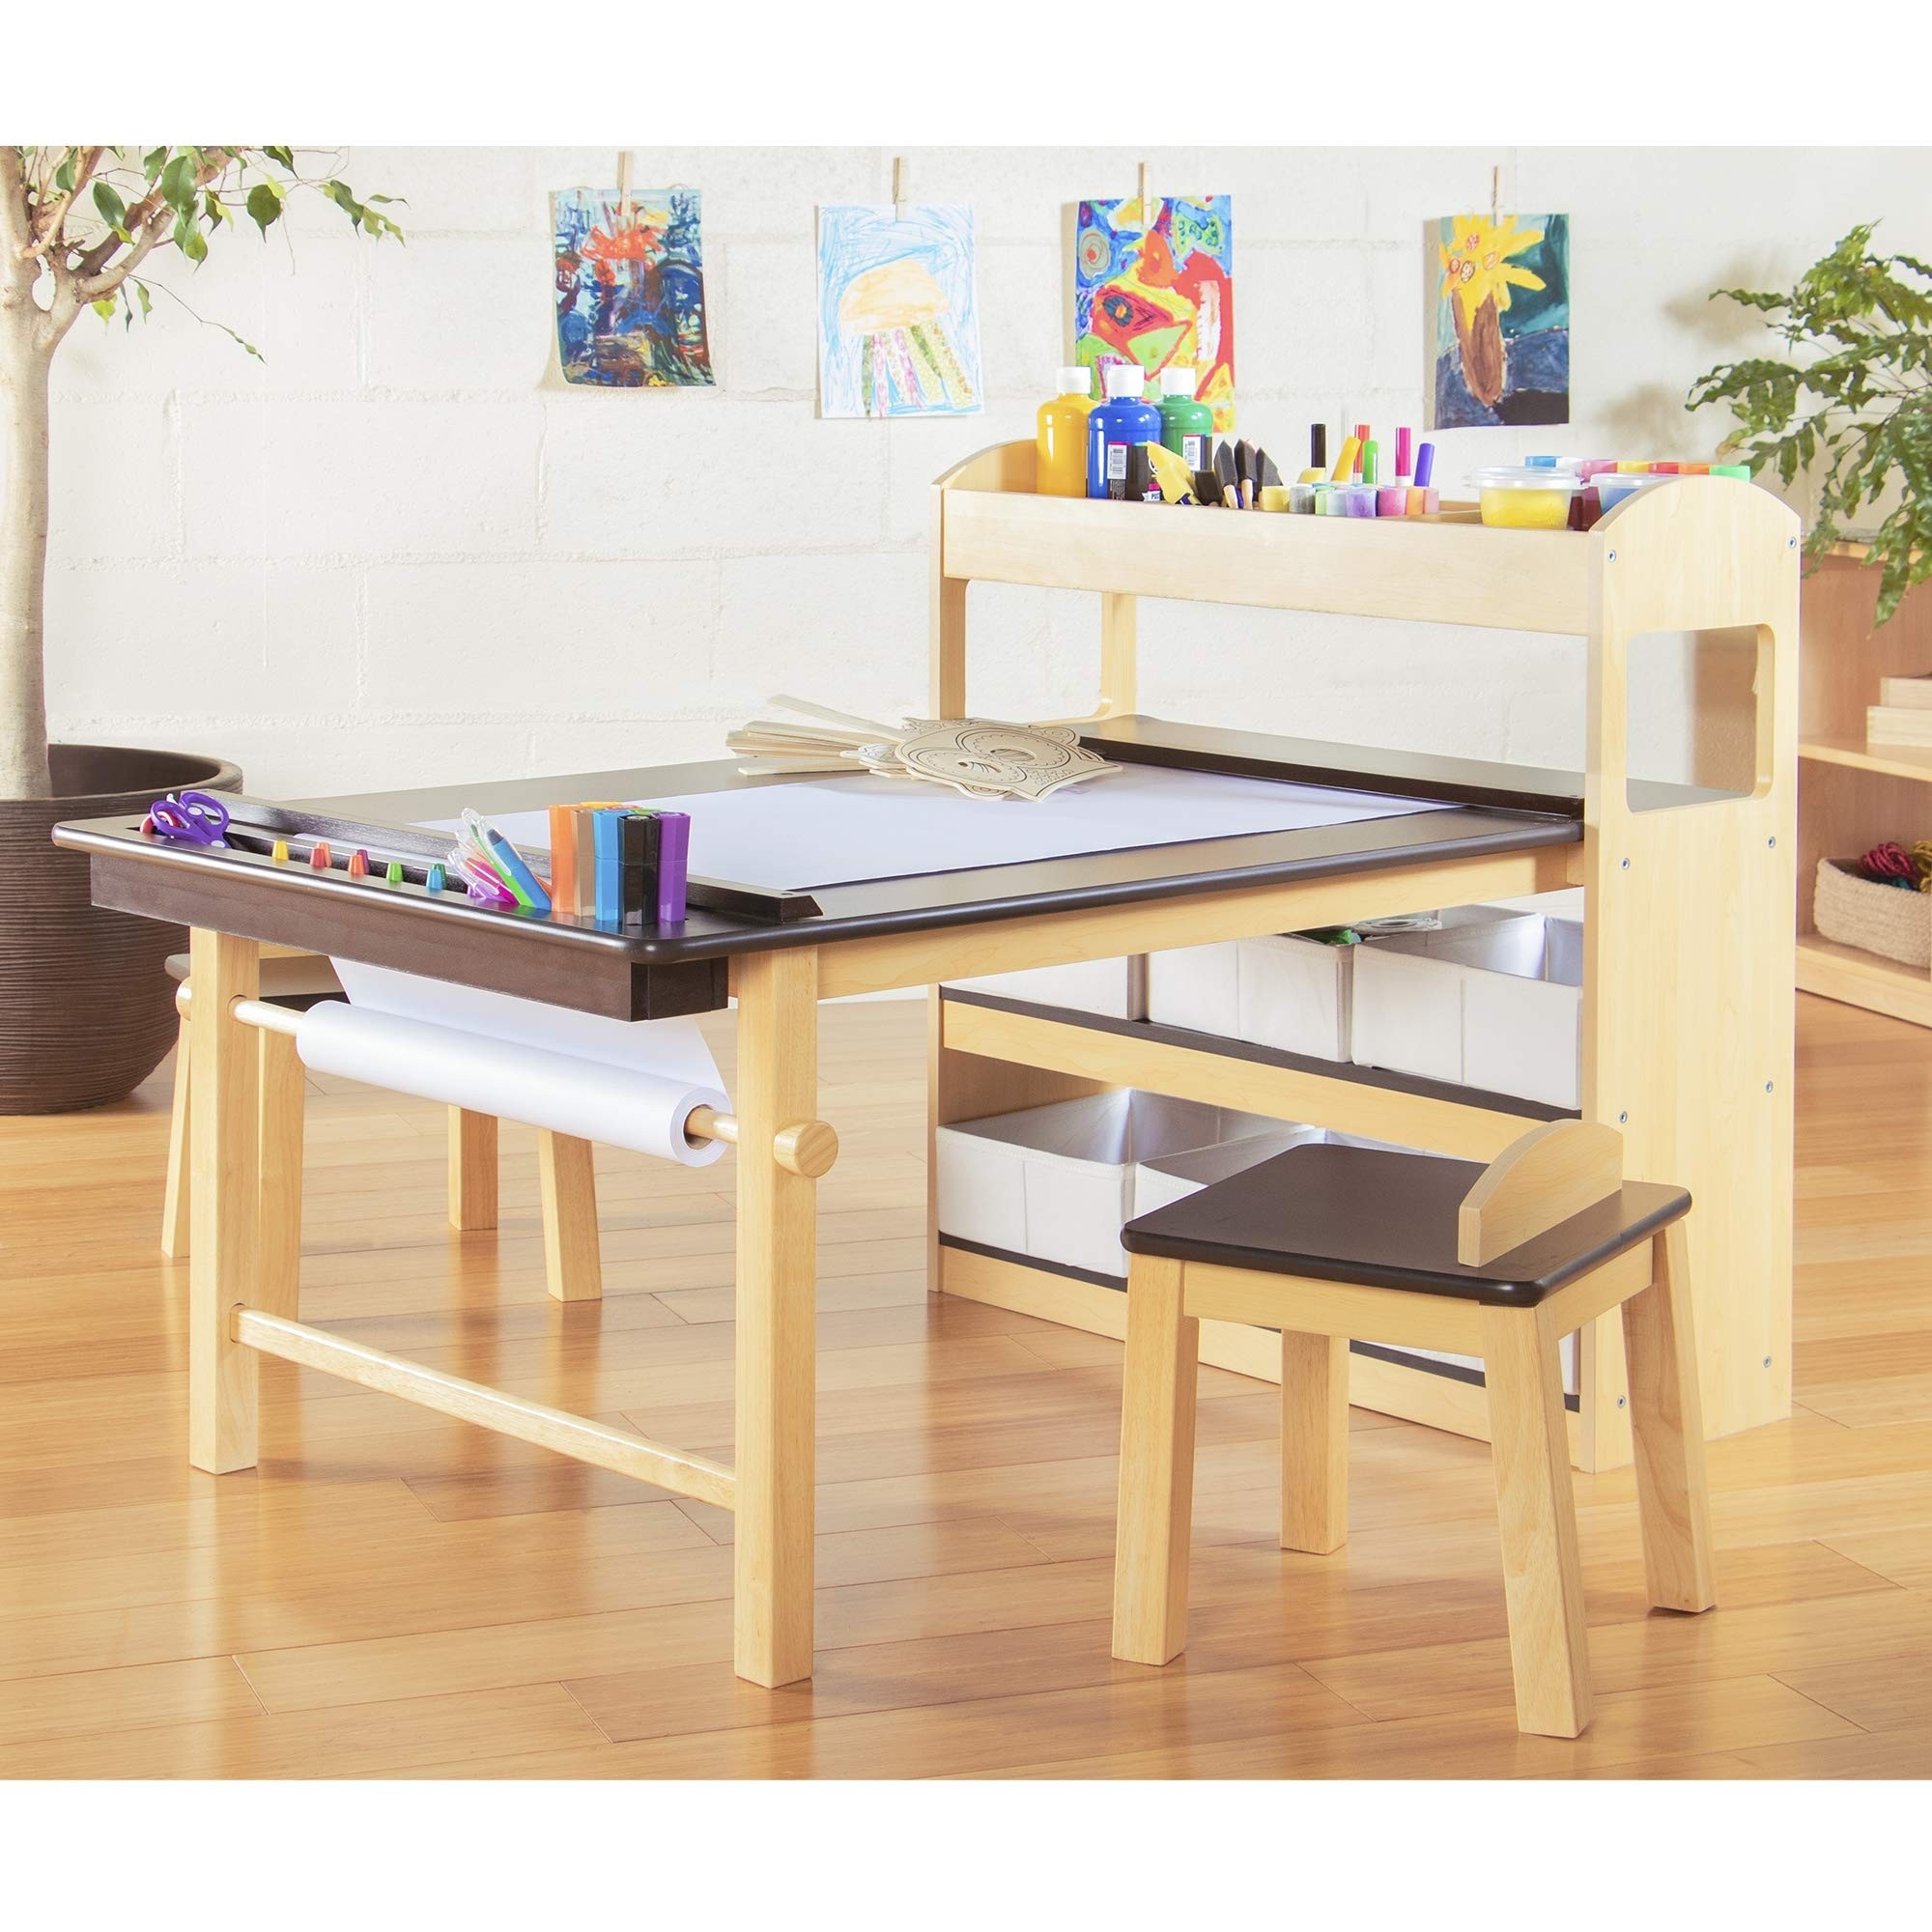 Guidecraft deluxe art center drawing and painting table 2